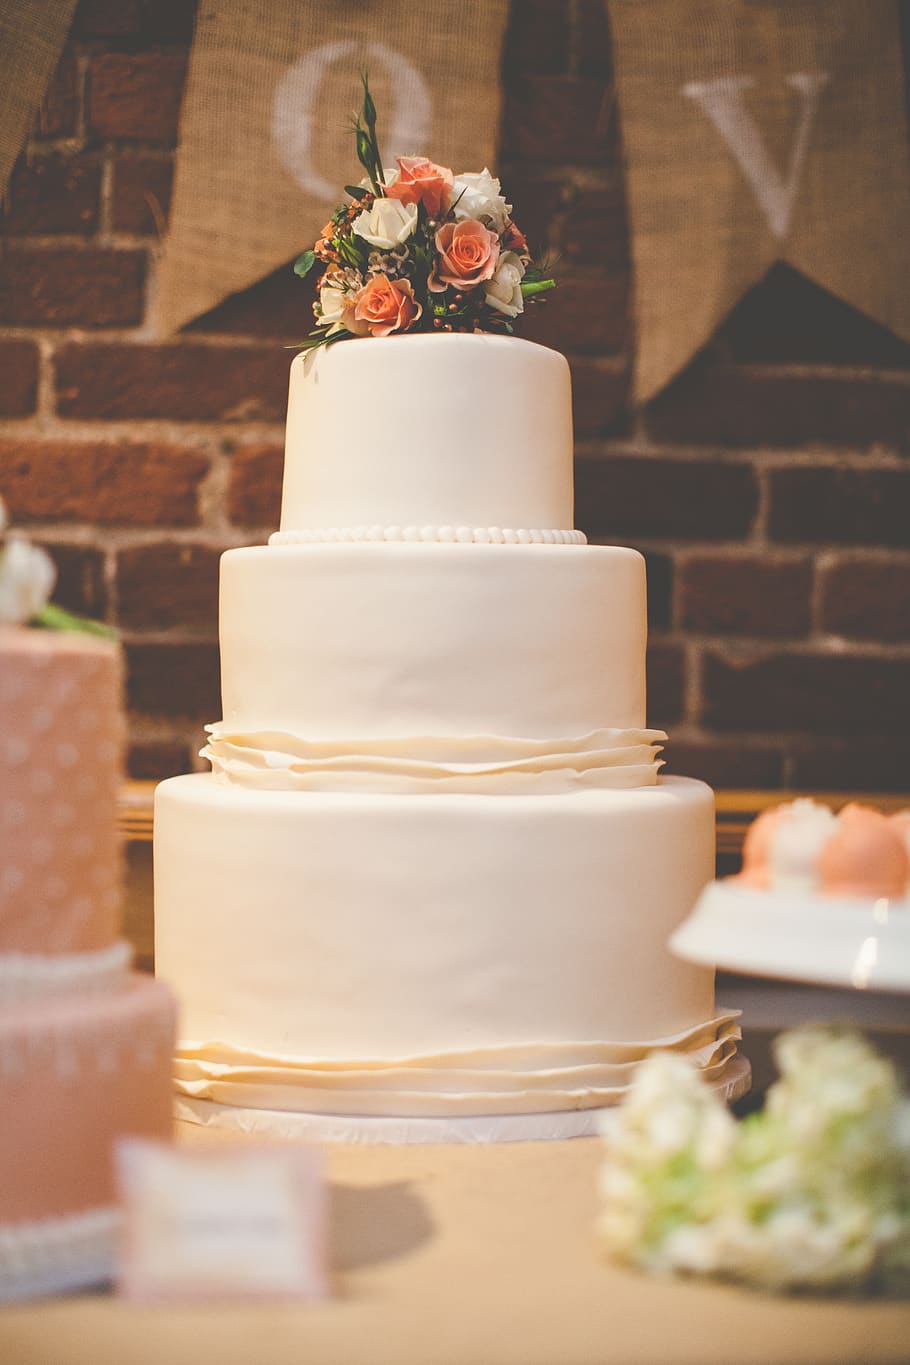 The Average Wedding Cake Cost, Backed by Real Data